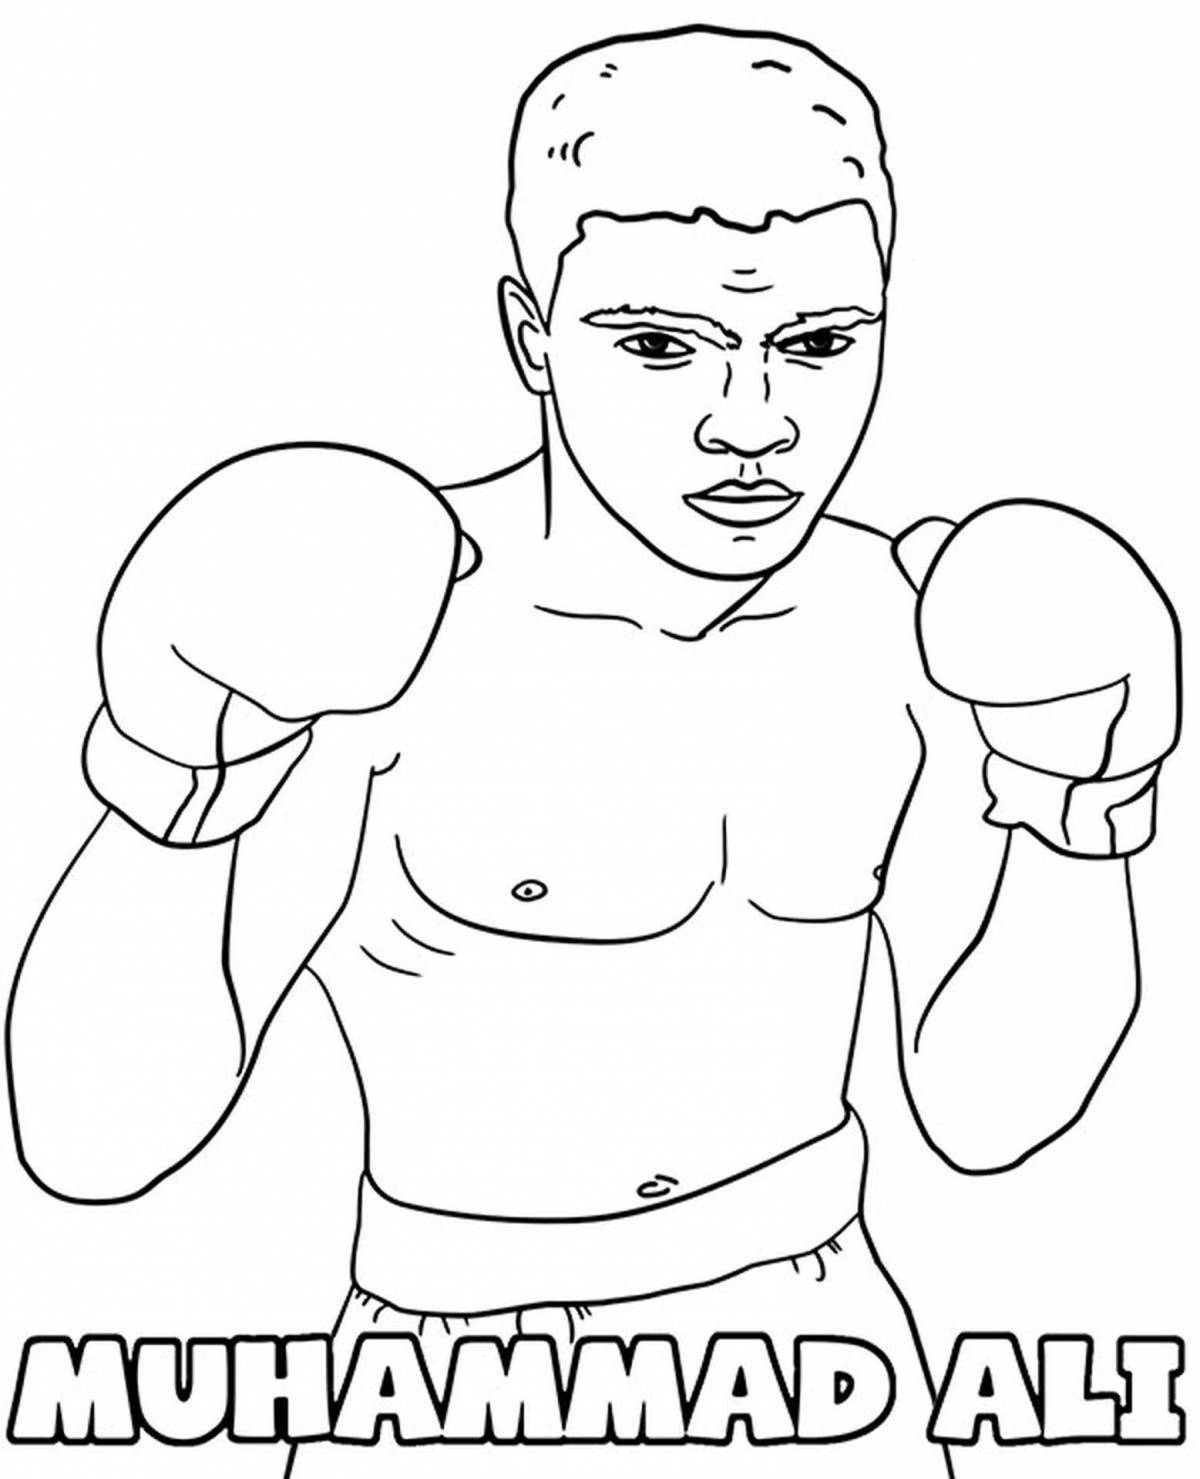 Joyous boxing and boo coloring page